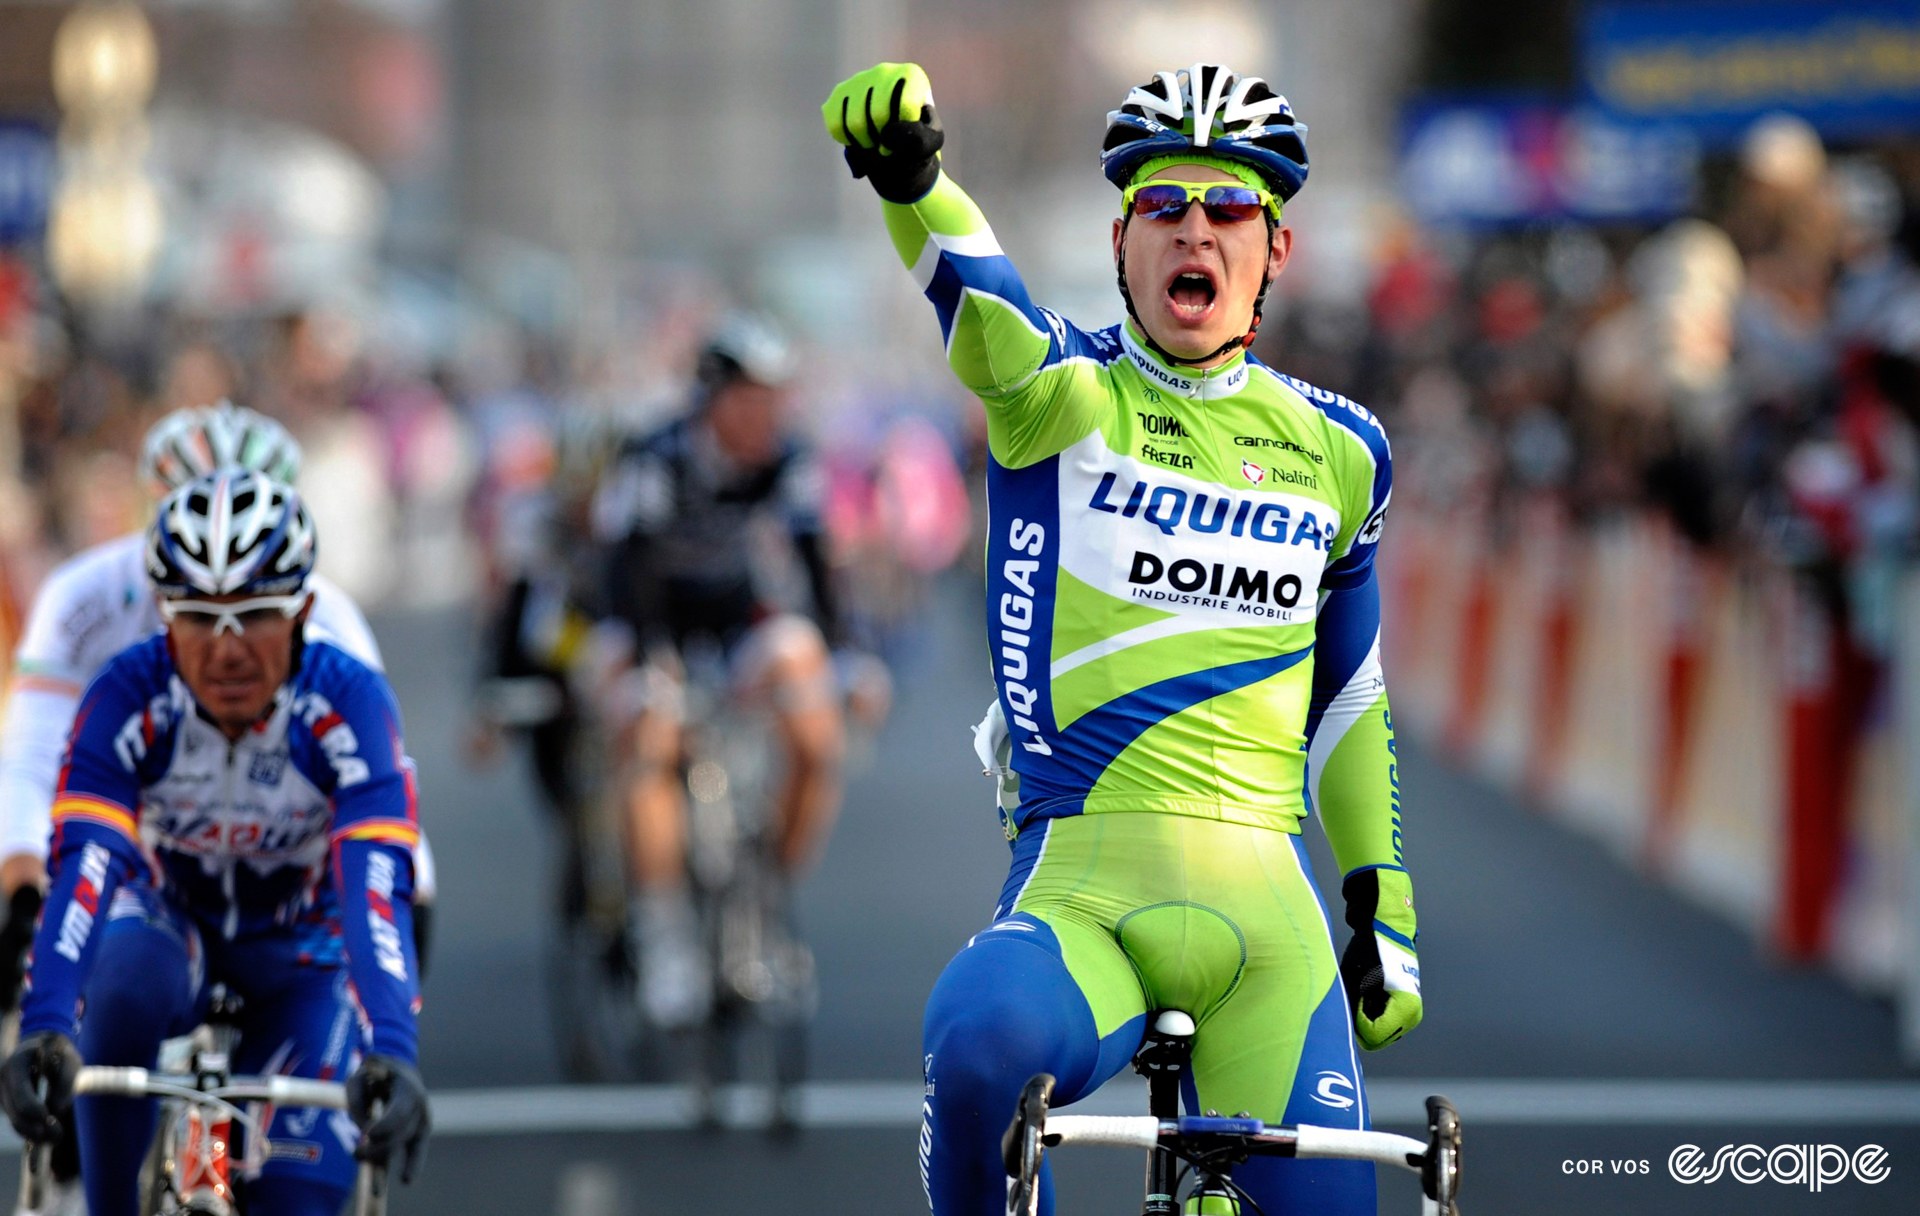 Peter Sagan celebrates winning a stage at the 2010 Paris-Nice, with a fist pump.